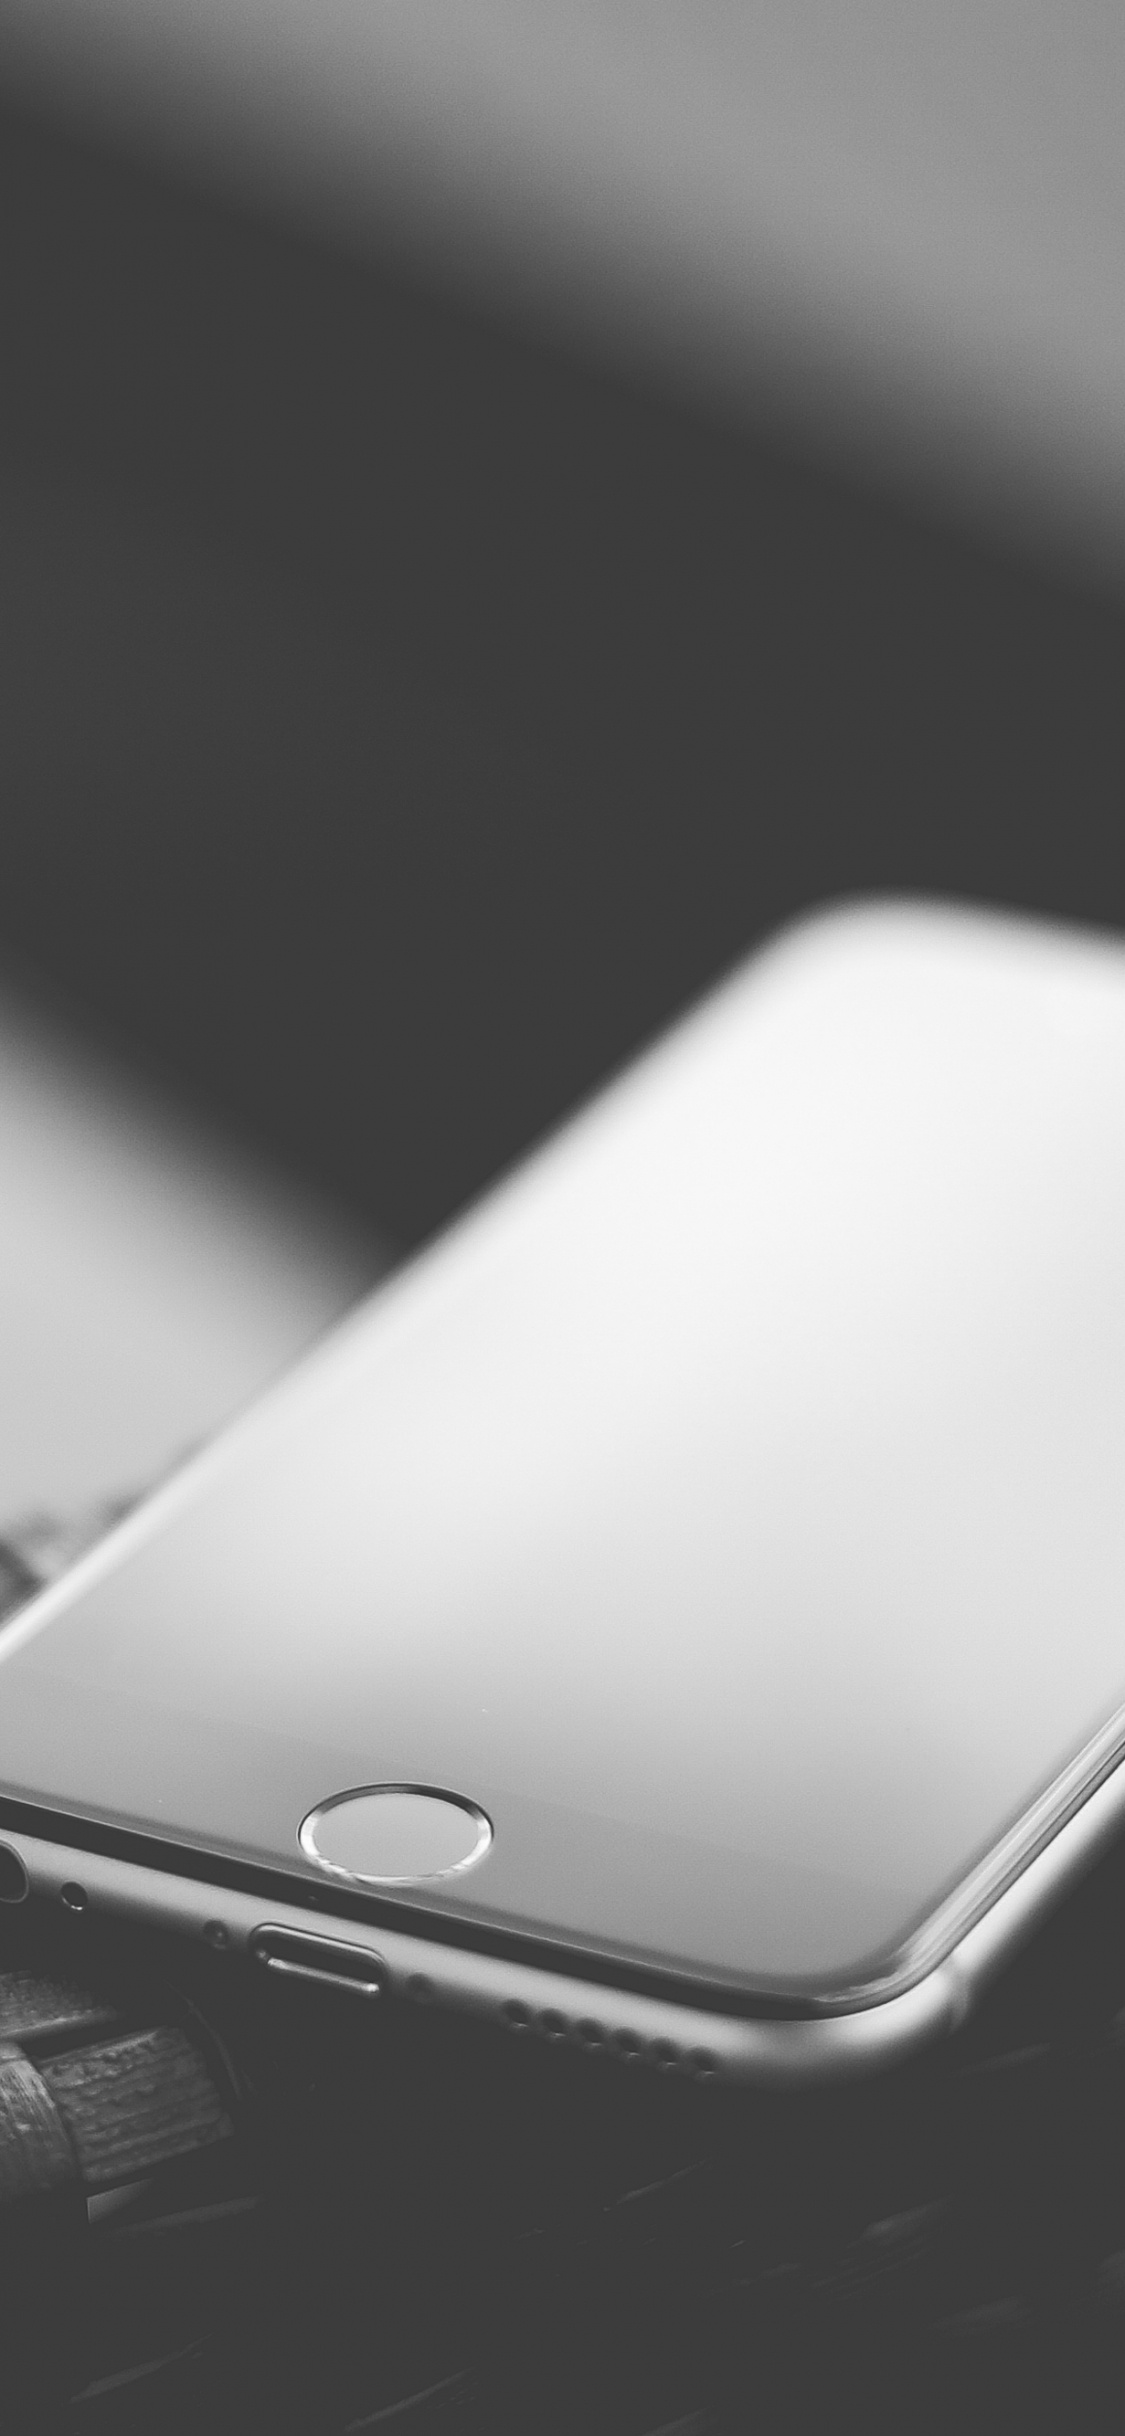 White Iphone 5 c on White Textile. Wallpaper in 1125x2436 Resolution